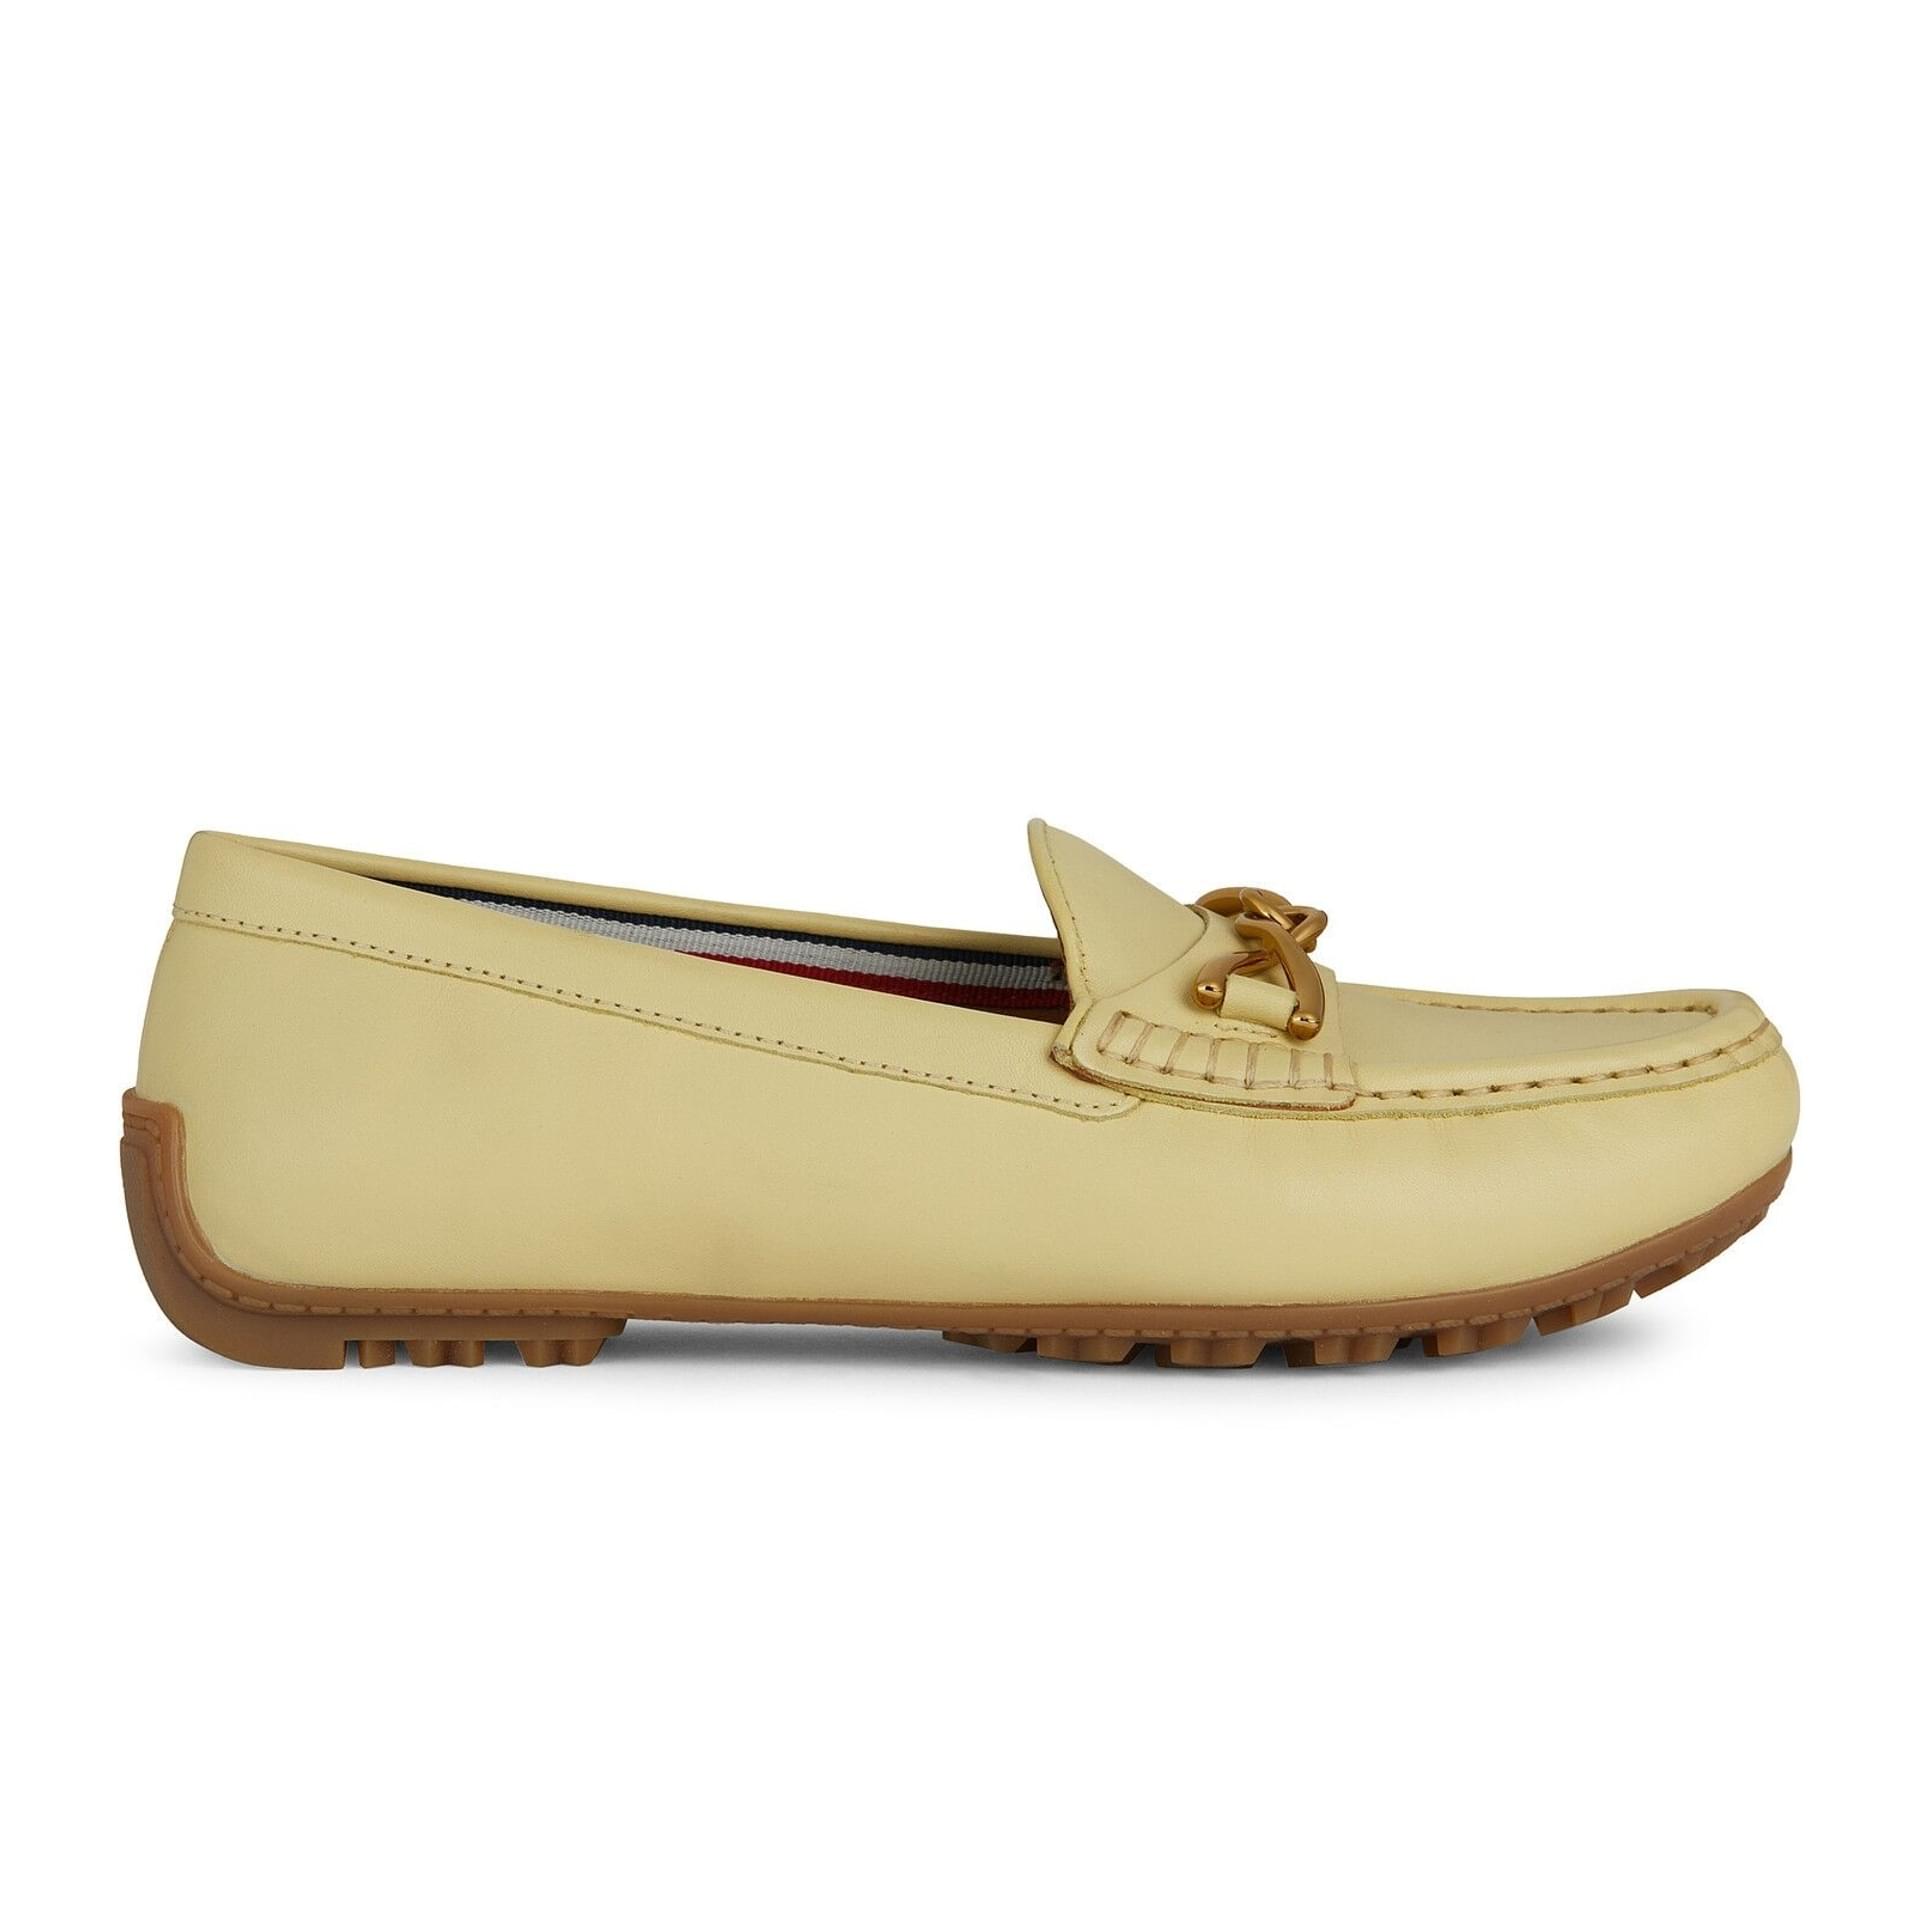 Geox Kosmopolis + Grip Moccassins D35RCB_00043 in Light Yellow